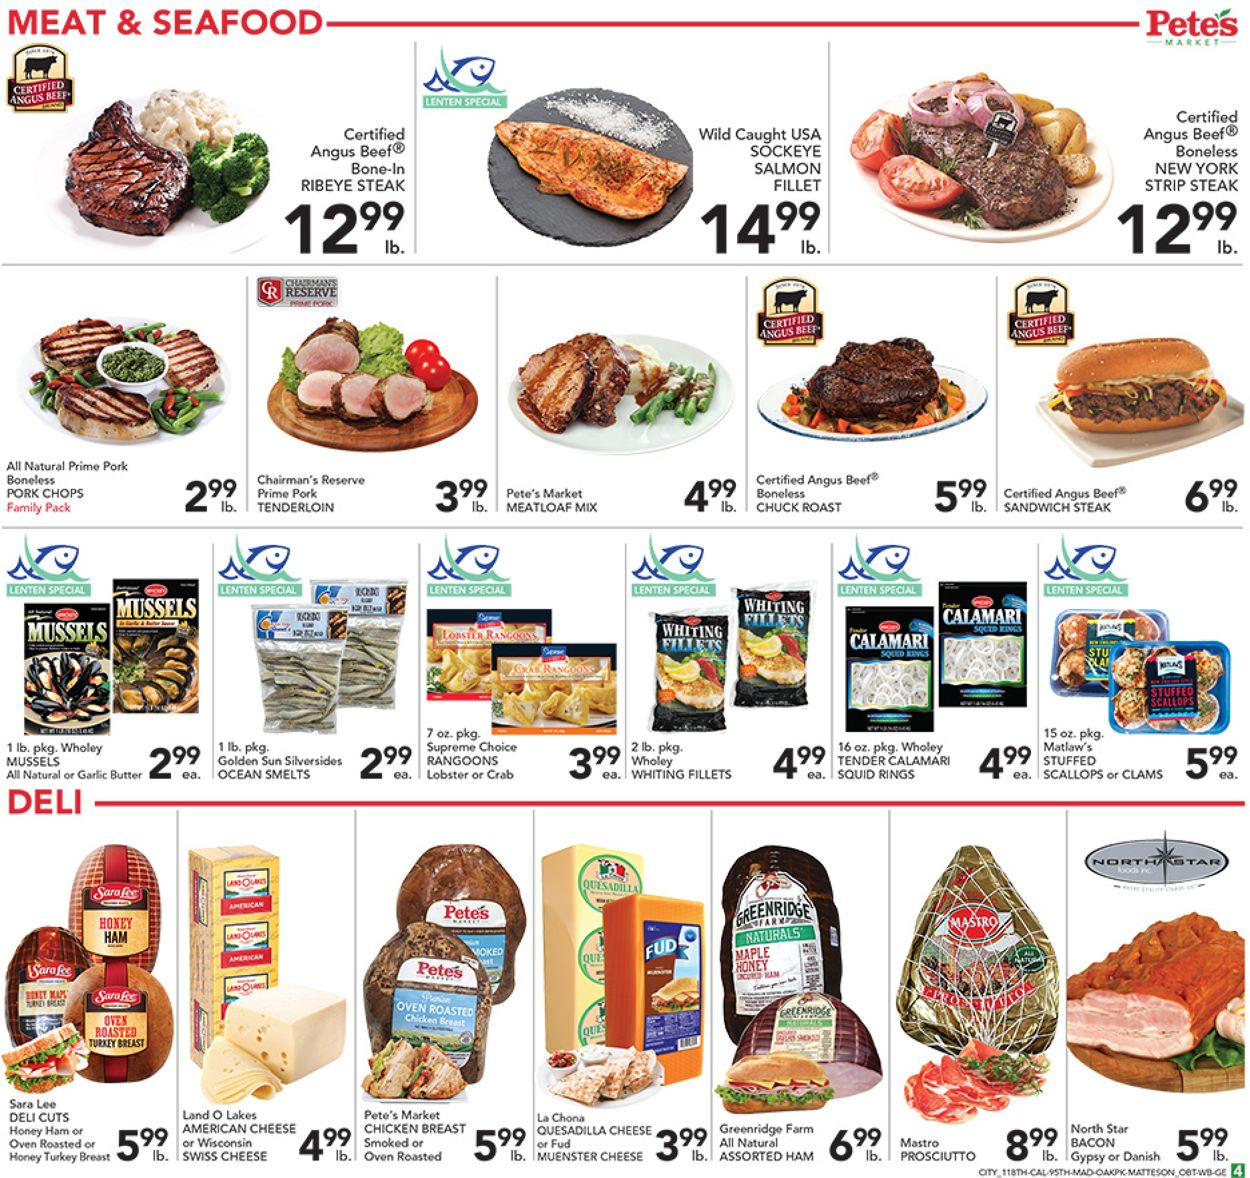 Pete's Fresh Market Current weekly ad 03/23 03/29/2022 [4] frequent